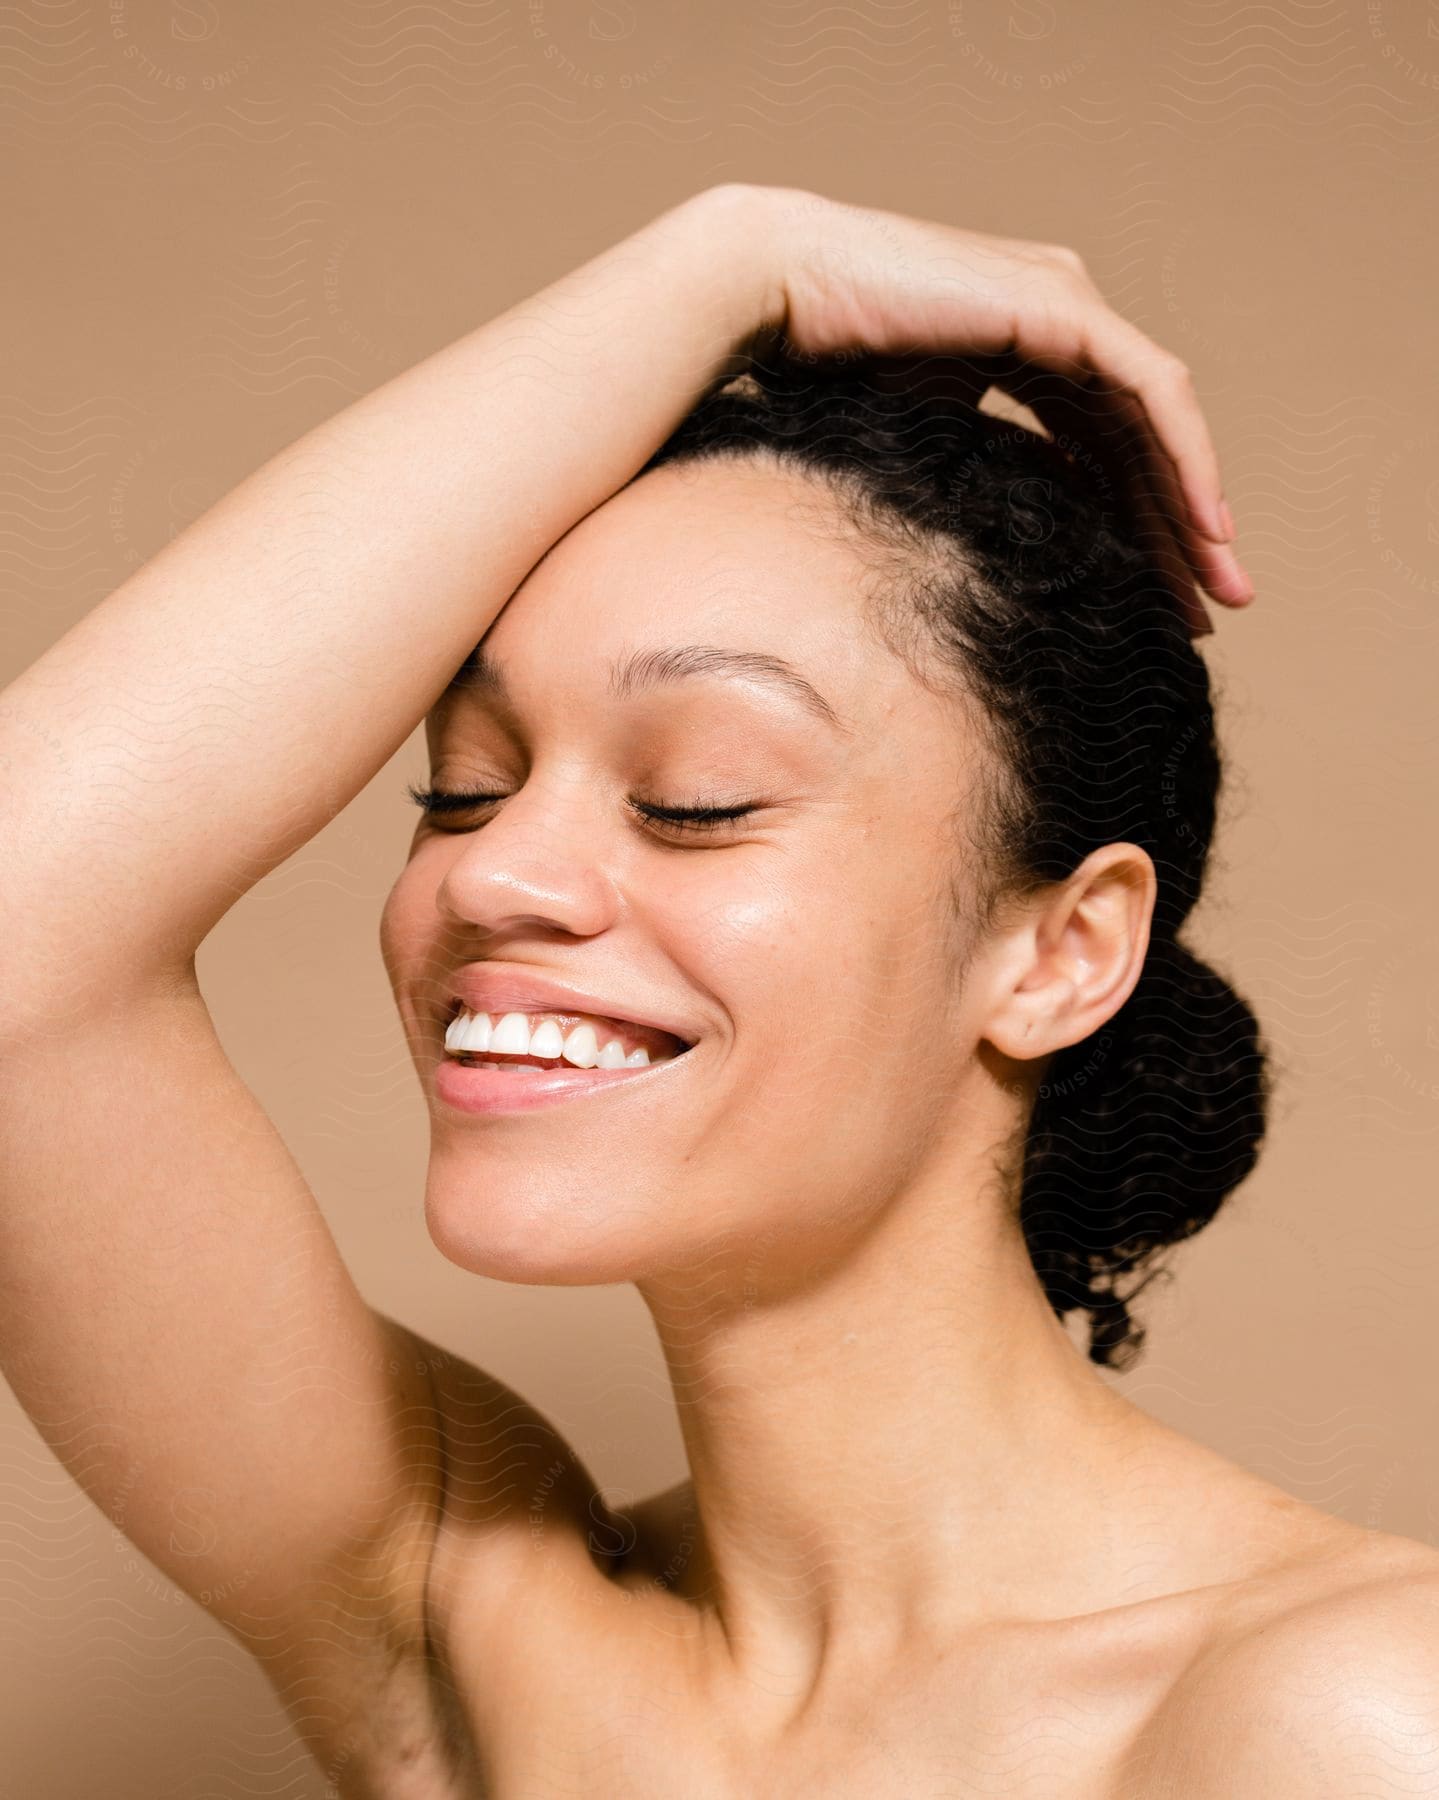 Close-up on a woman's face with her black hair tied up and one of her hands on her head while smiling